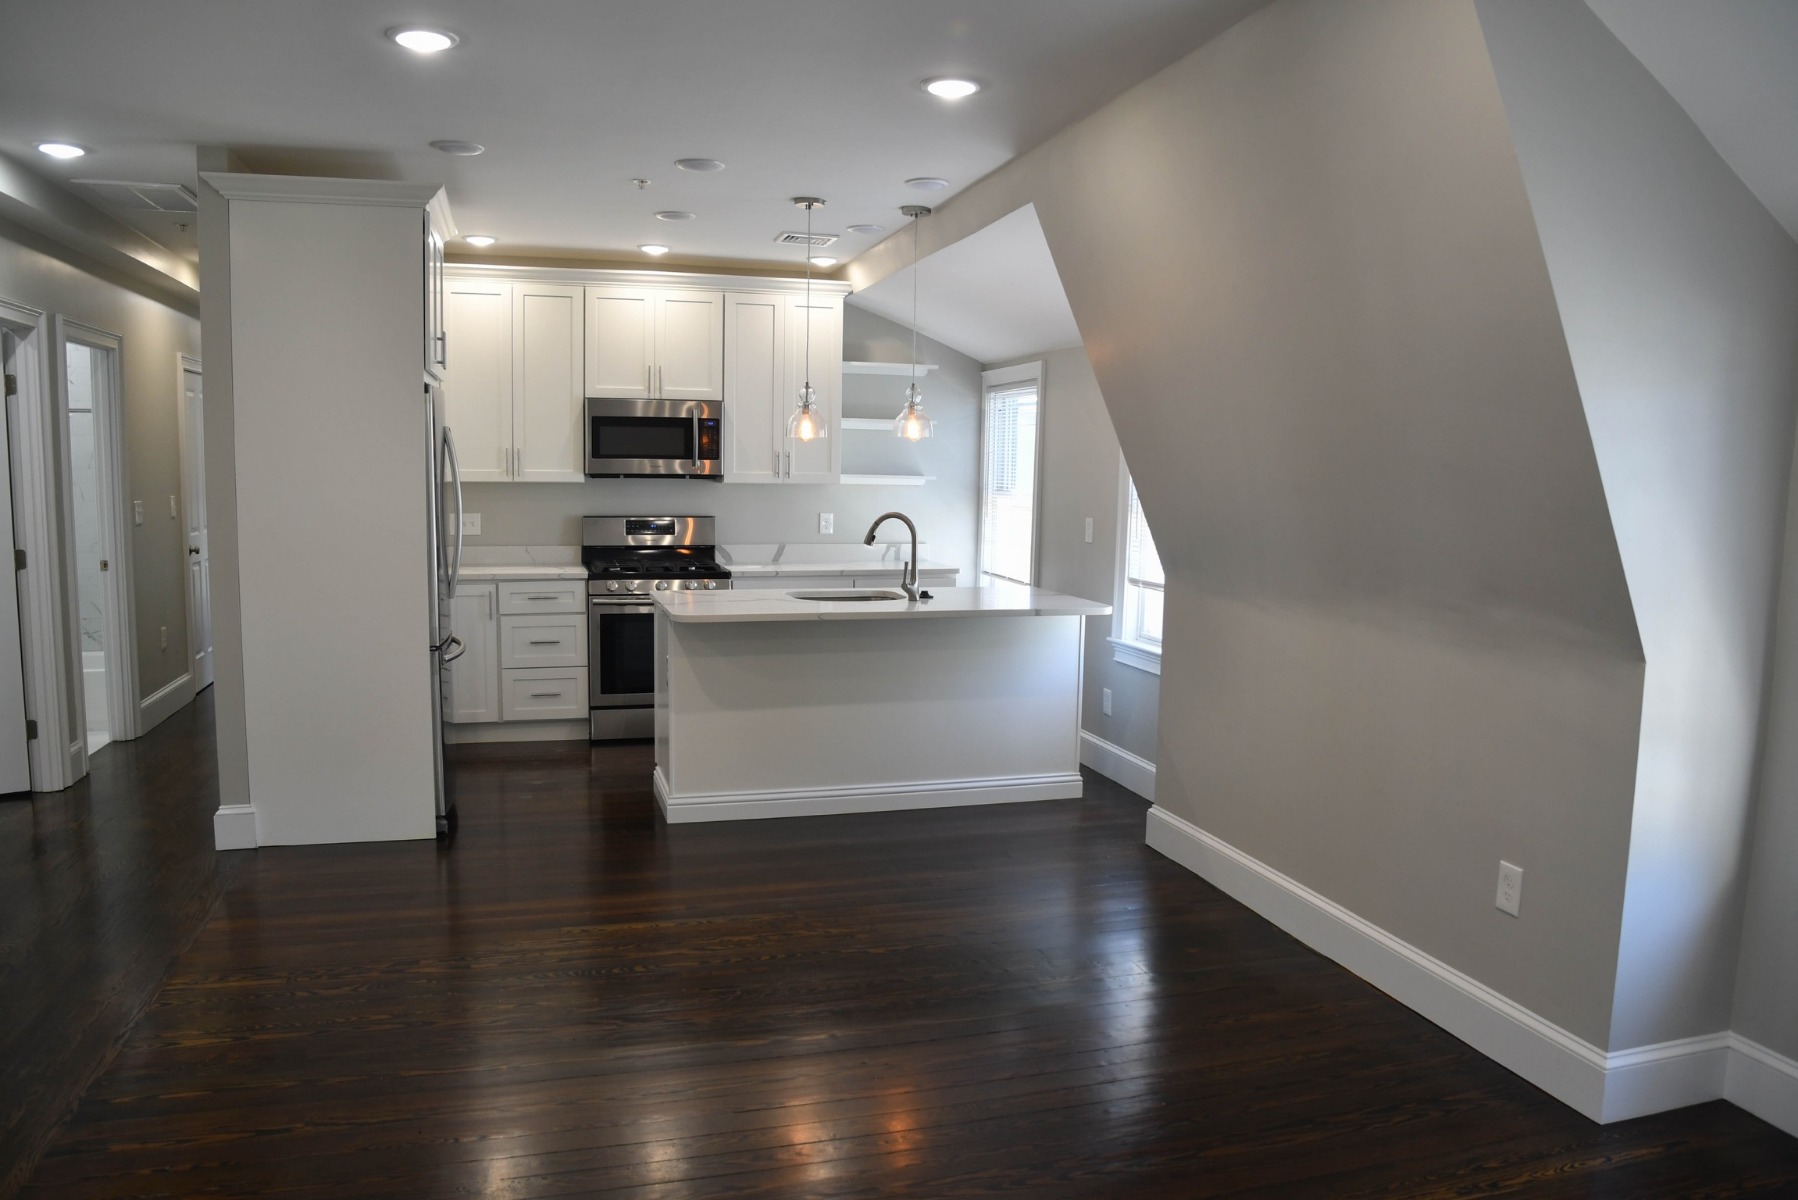 Photos of apartment on Tower St.,Boston MA 02130